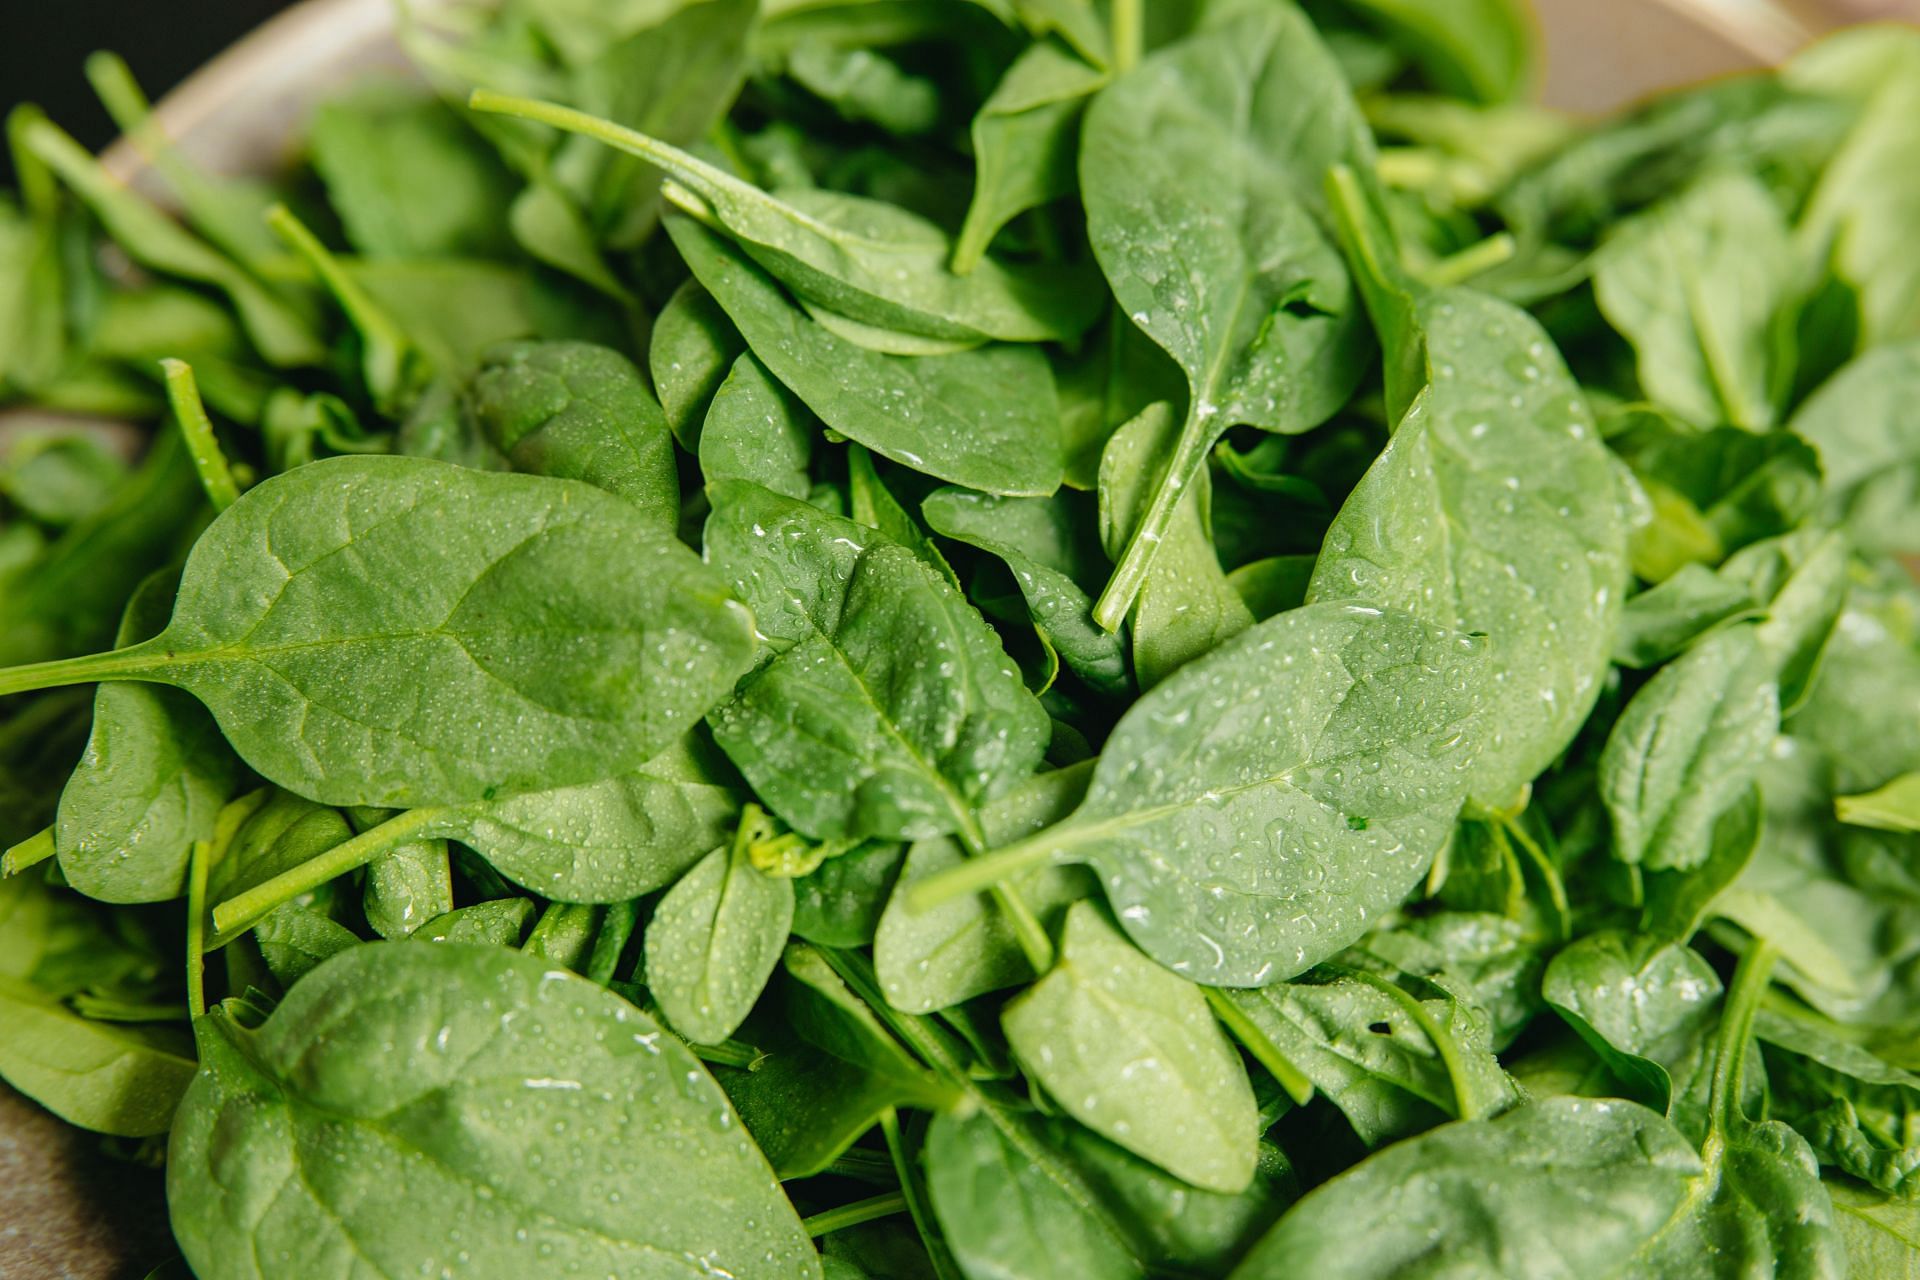 Spinach is considered one of the best foods for magnesium intake. (Image via Pexels)